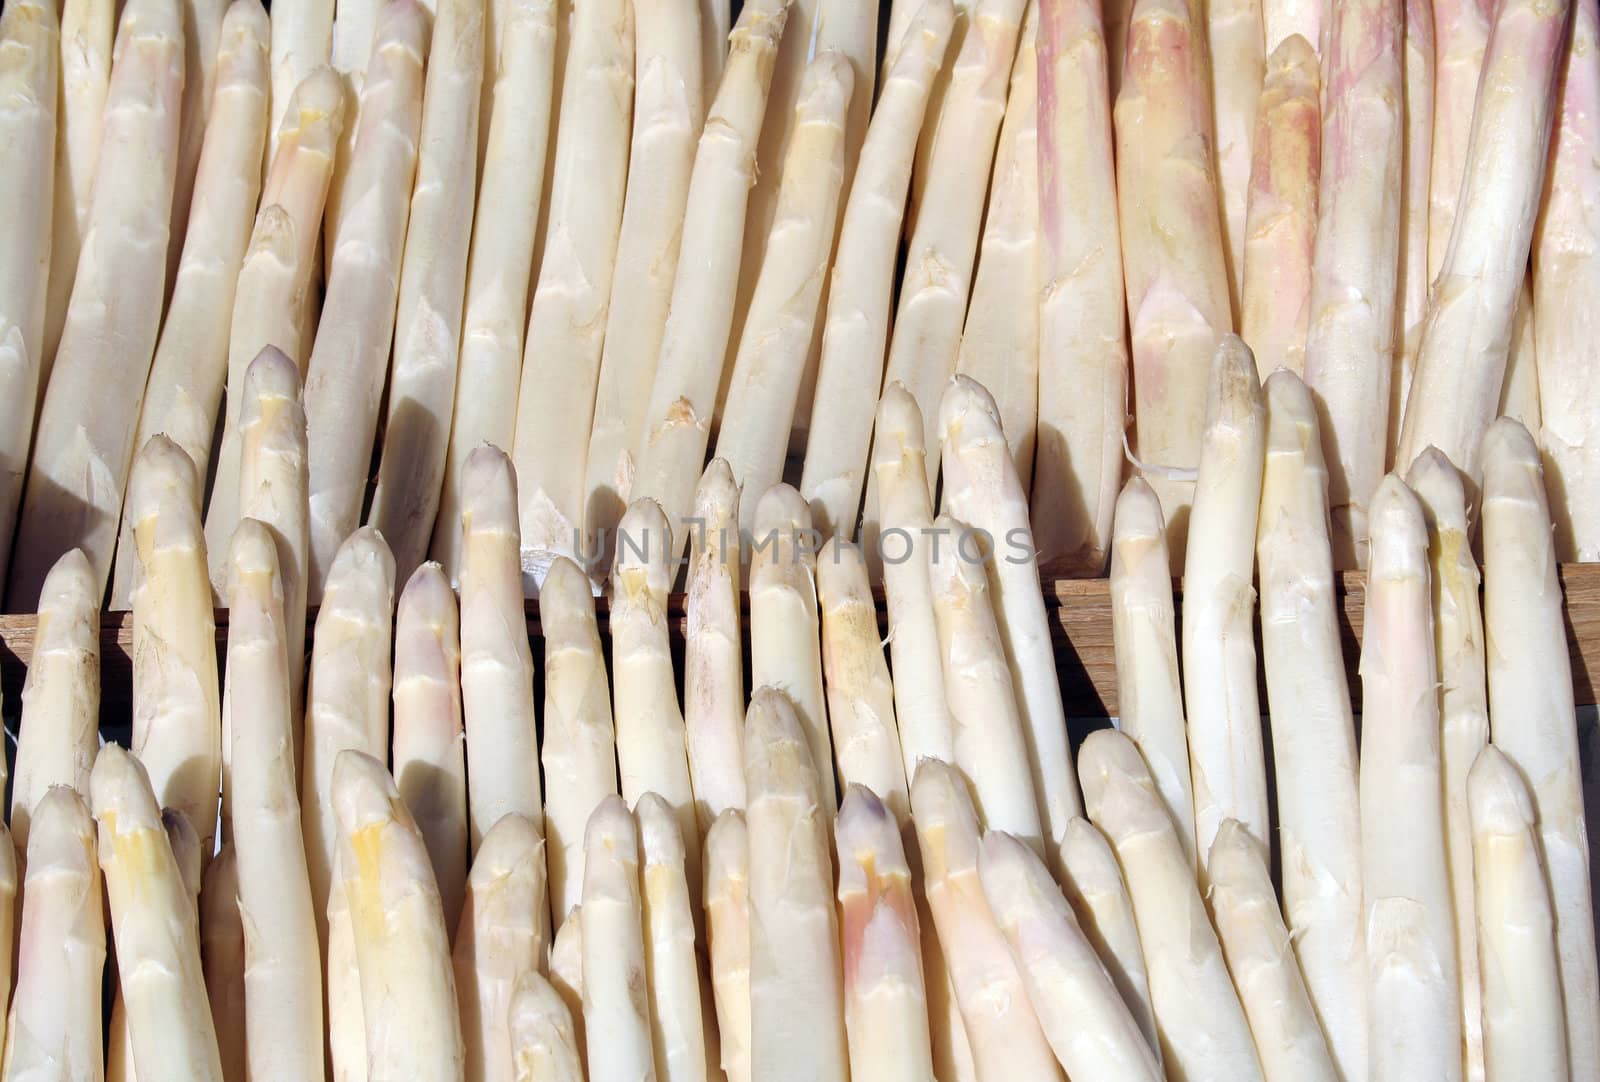 White asparagus displayed at the sunny outside of a grocery store.